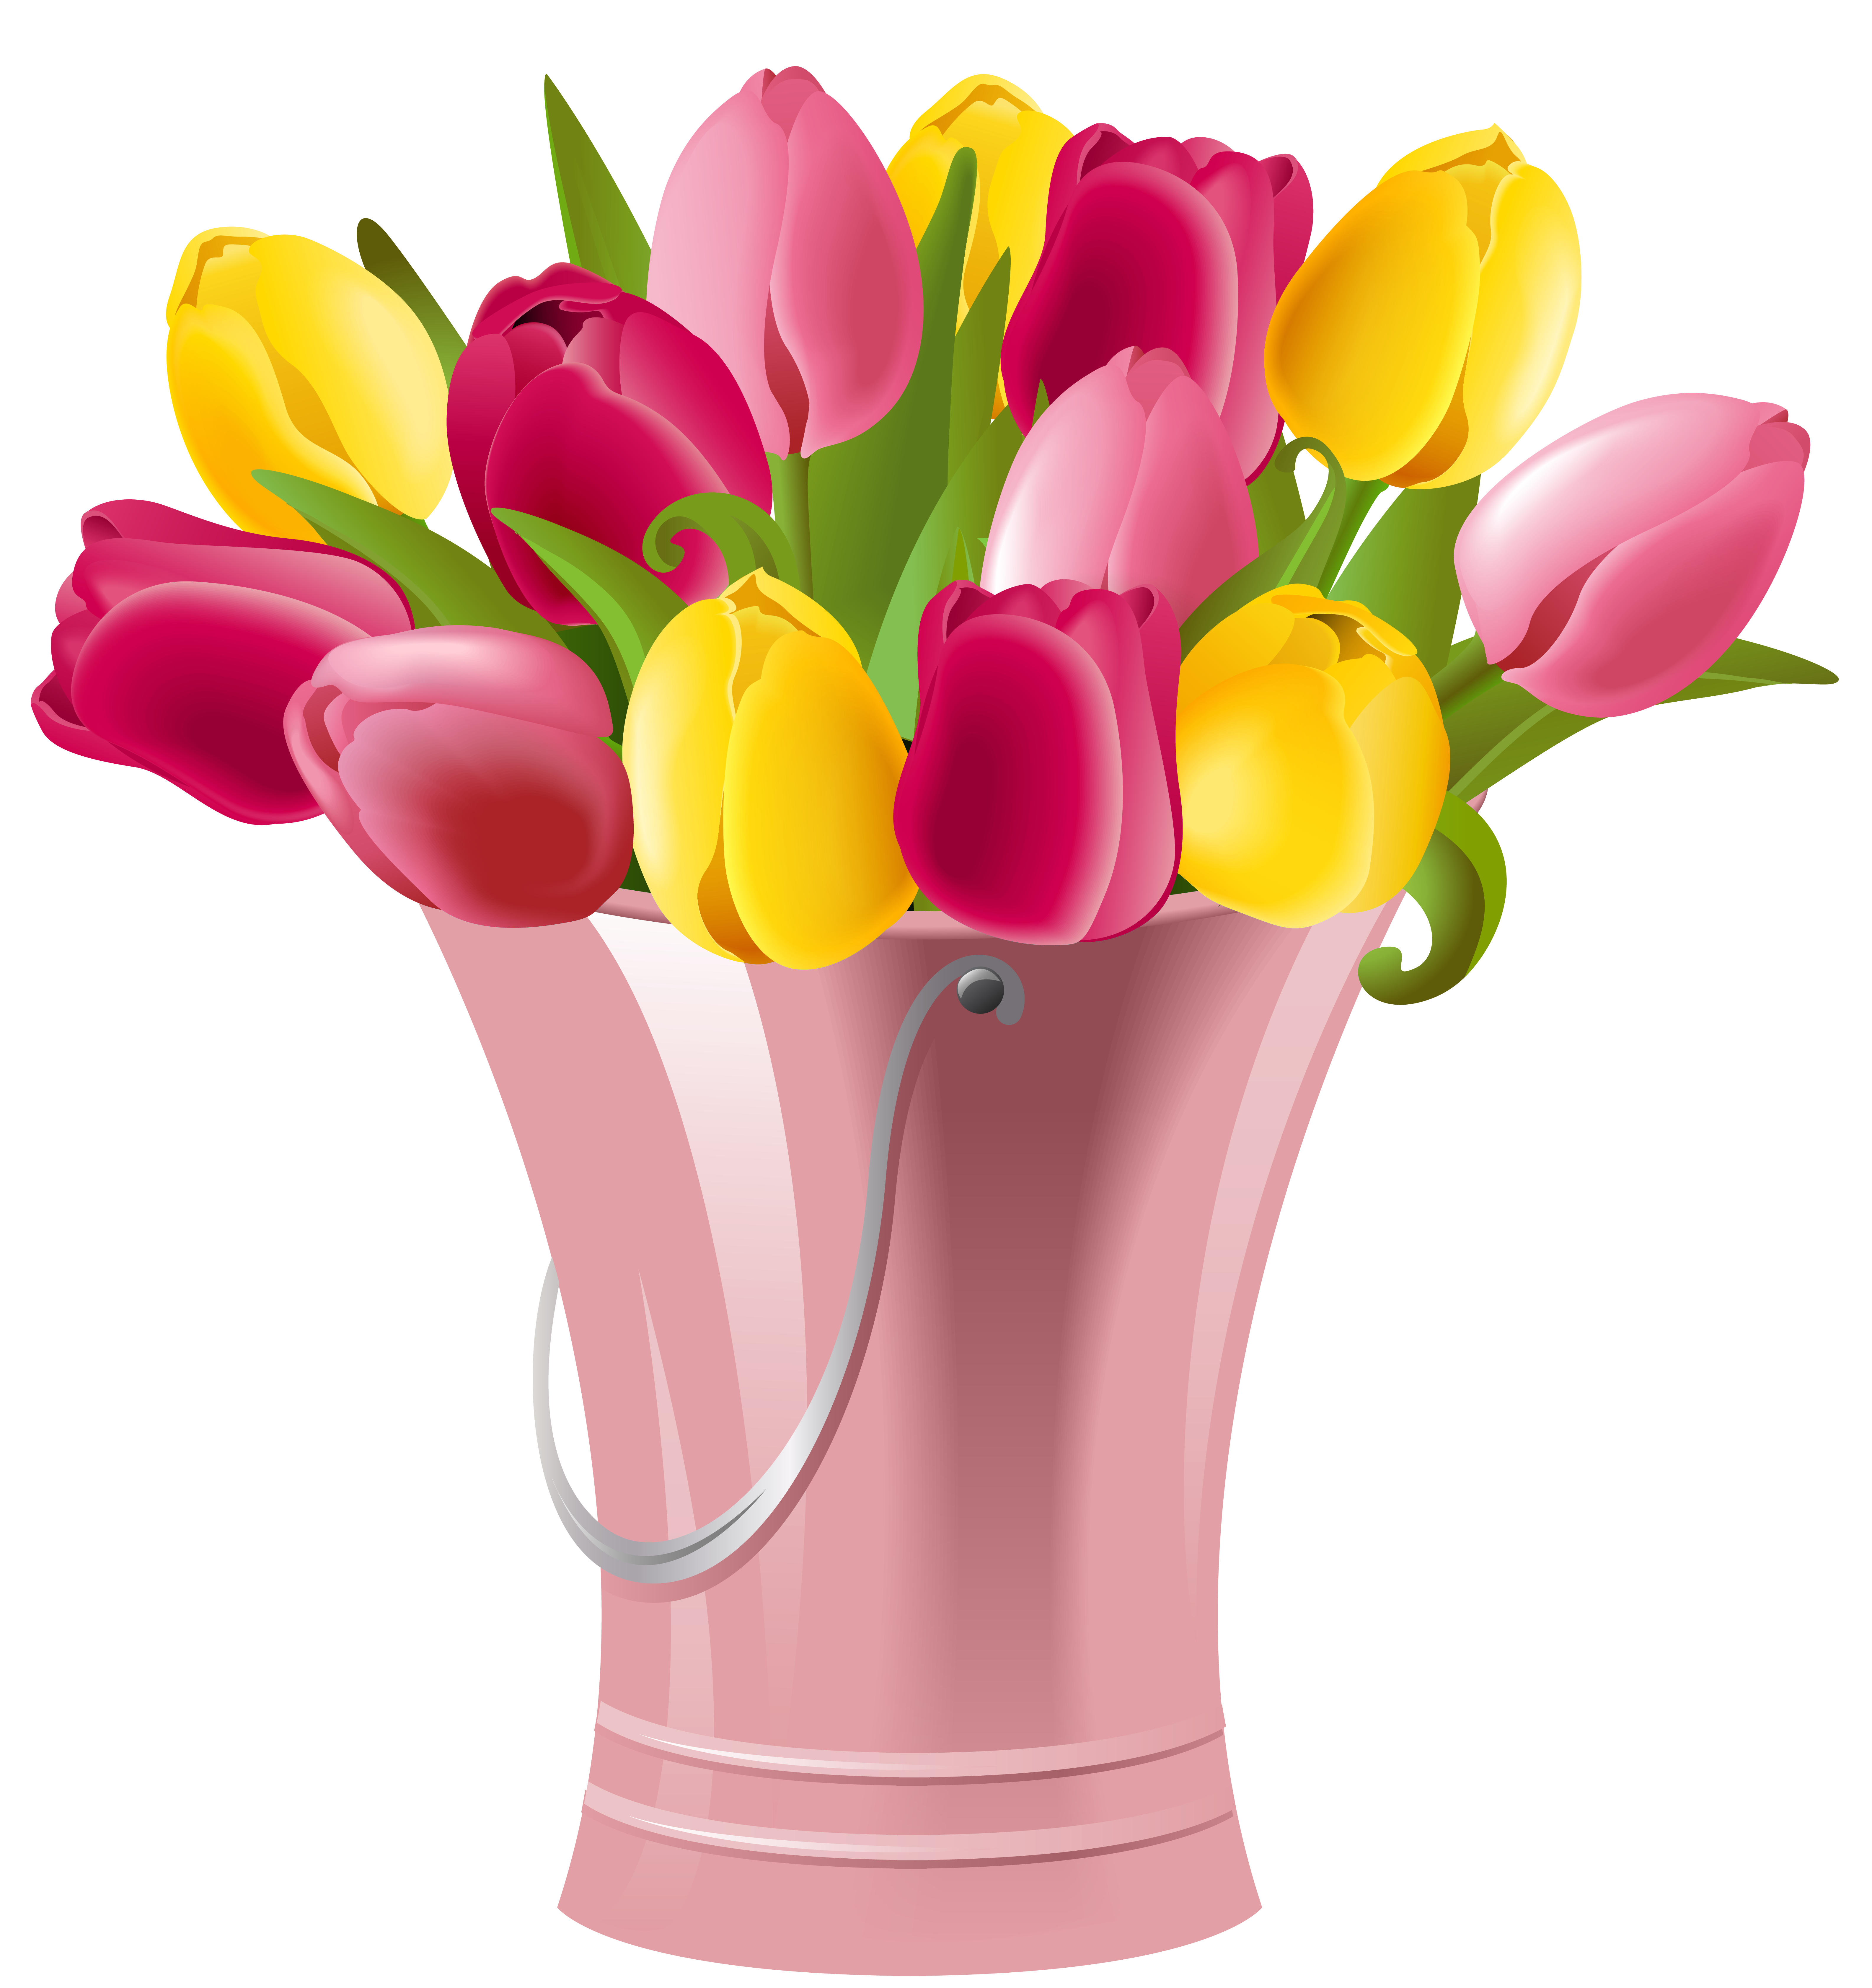 Spring Bucket with Tulips Transparent PNG Clip Art Image.